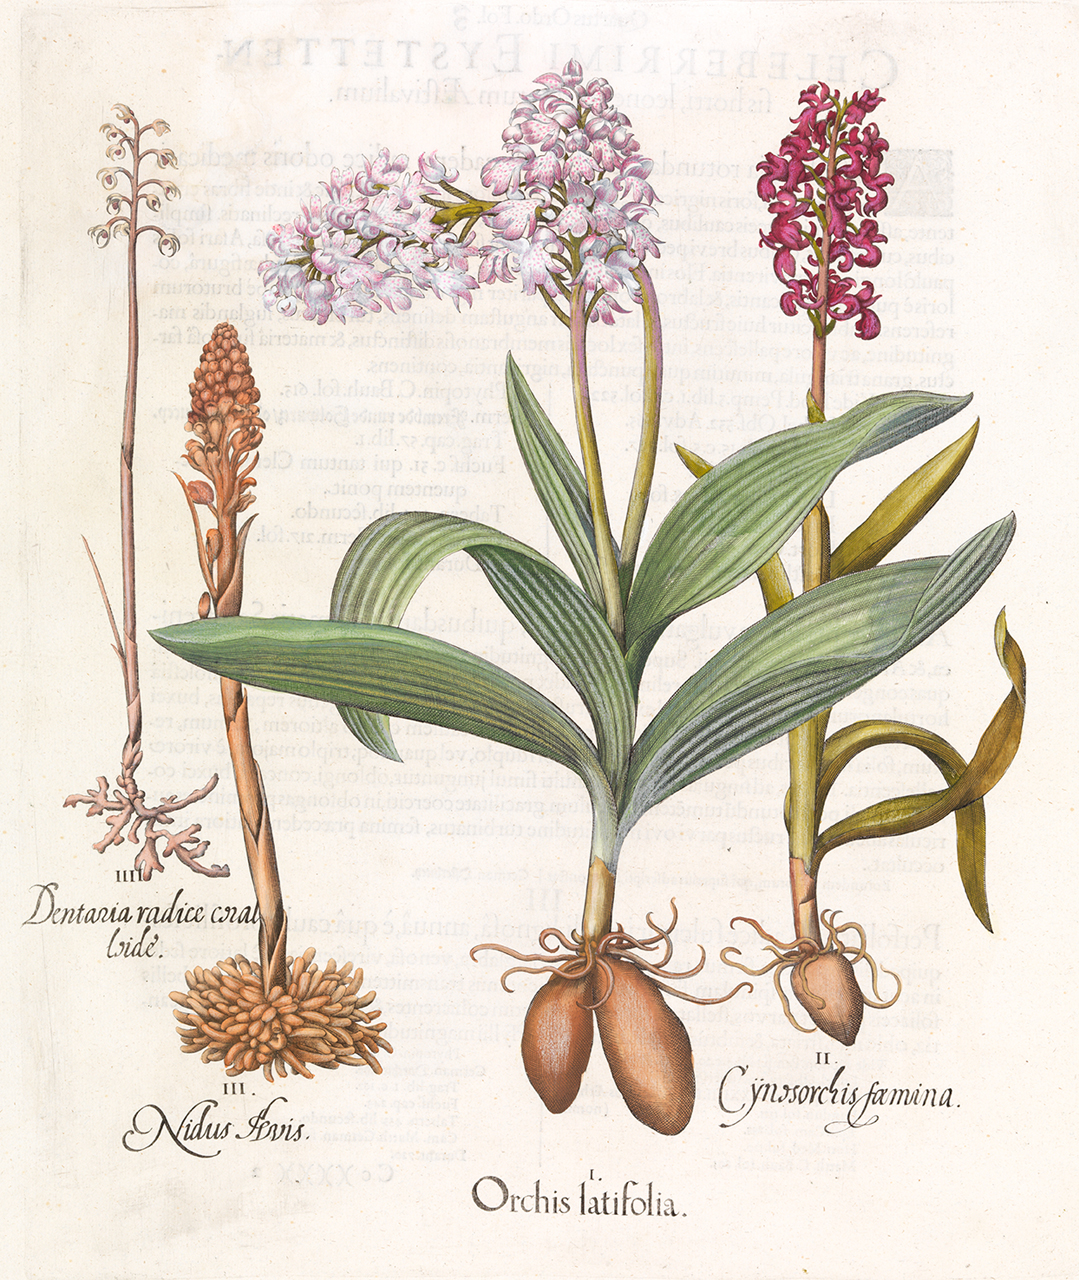 Besler, Basil (1561-1629) Purple orchid (Orchis Iatifolia) (c.1613) engraving plate 48.5cm (H) x 40.3cm (W) sheet 56.6cm (H) x 45.2cm (W) 2015.0051.000.000 Baillieu Library Print Collection, University of Melbourne. Gift of Ronald Alfred Walker. Donated through the Australian Government's Cultural Gifts Program, 2015.